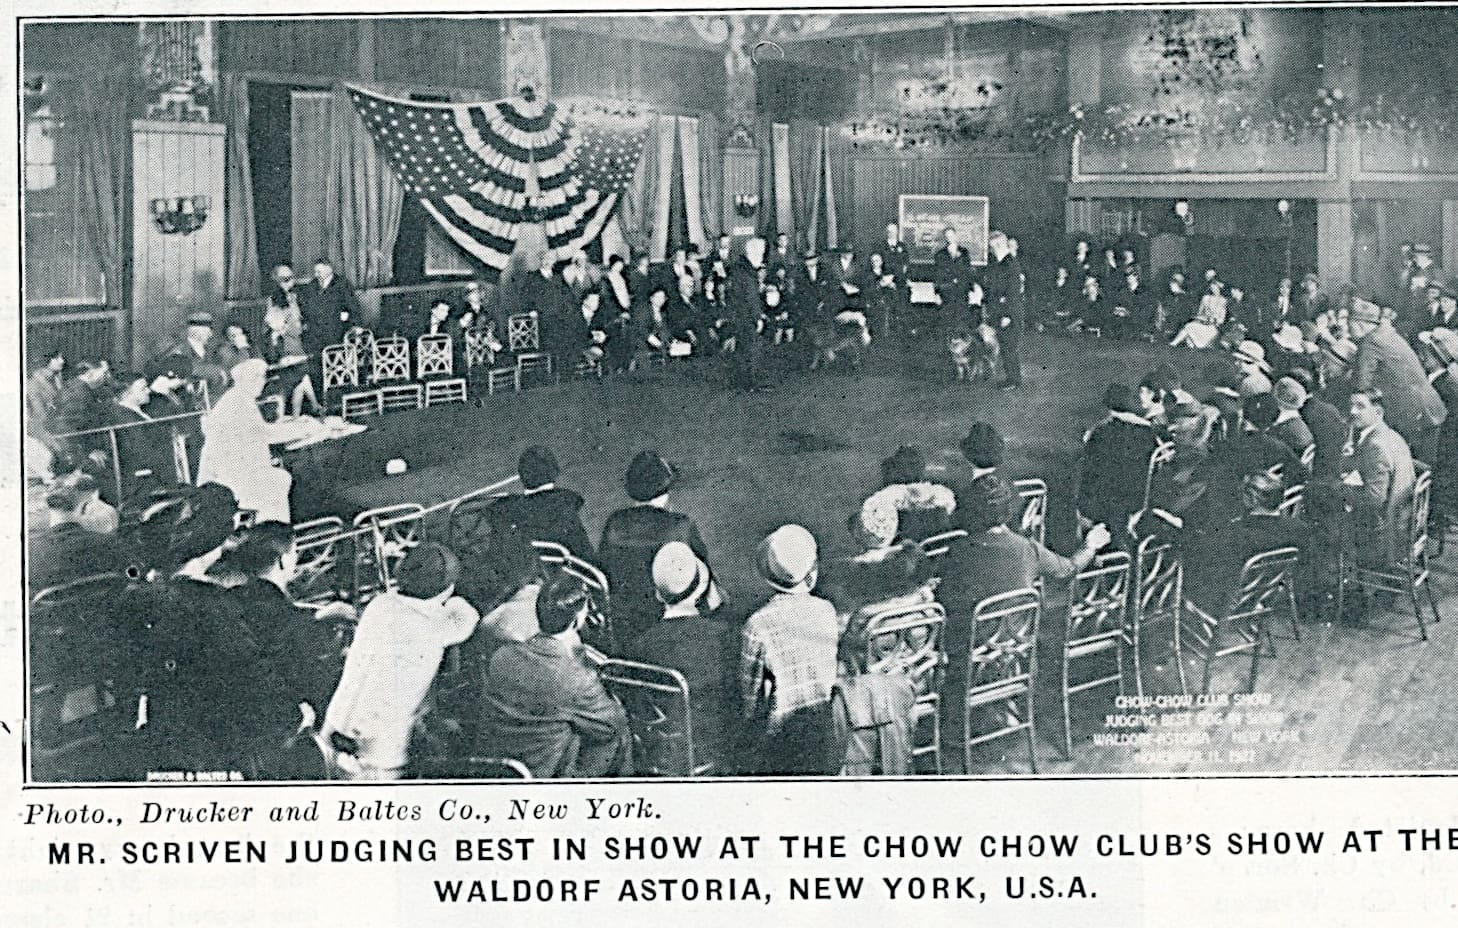 MULFRA article Sept 5 1930 Supplement to Our Dogs.. Mr. Scriven judging in 1927 at the Waldorf Astoria, New York, U.S.A.5